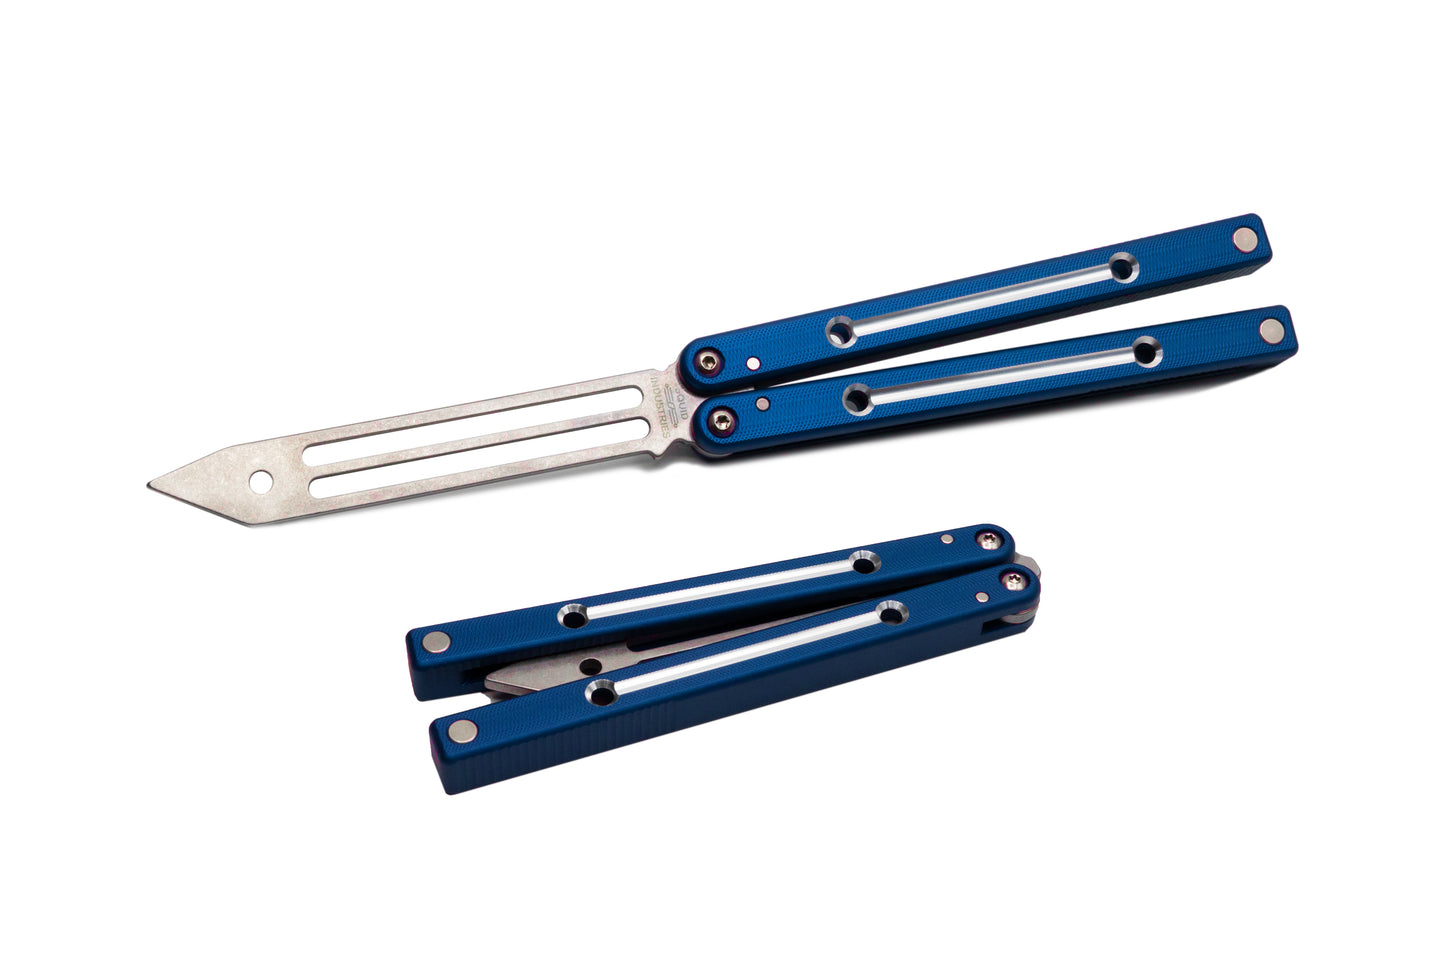 blue dual tone squidtrainer V4 Balisong Butterfly Knife Trainer 